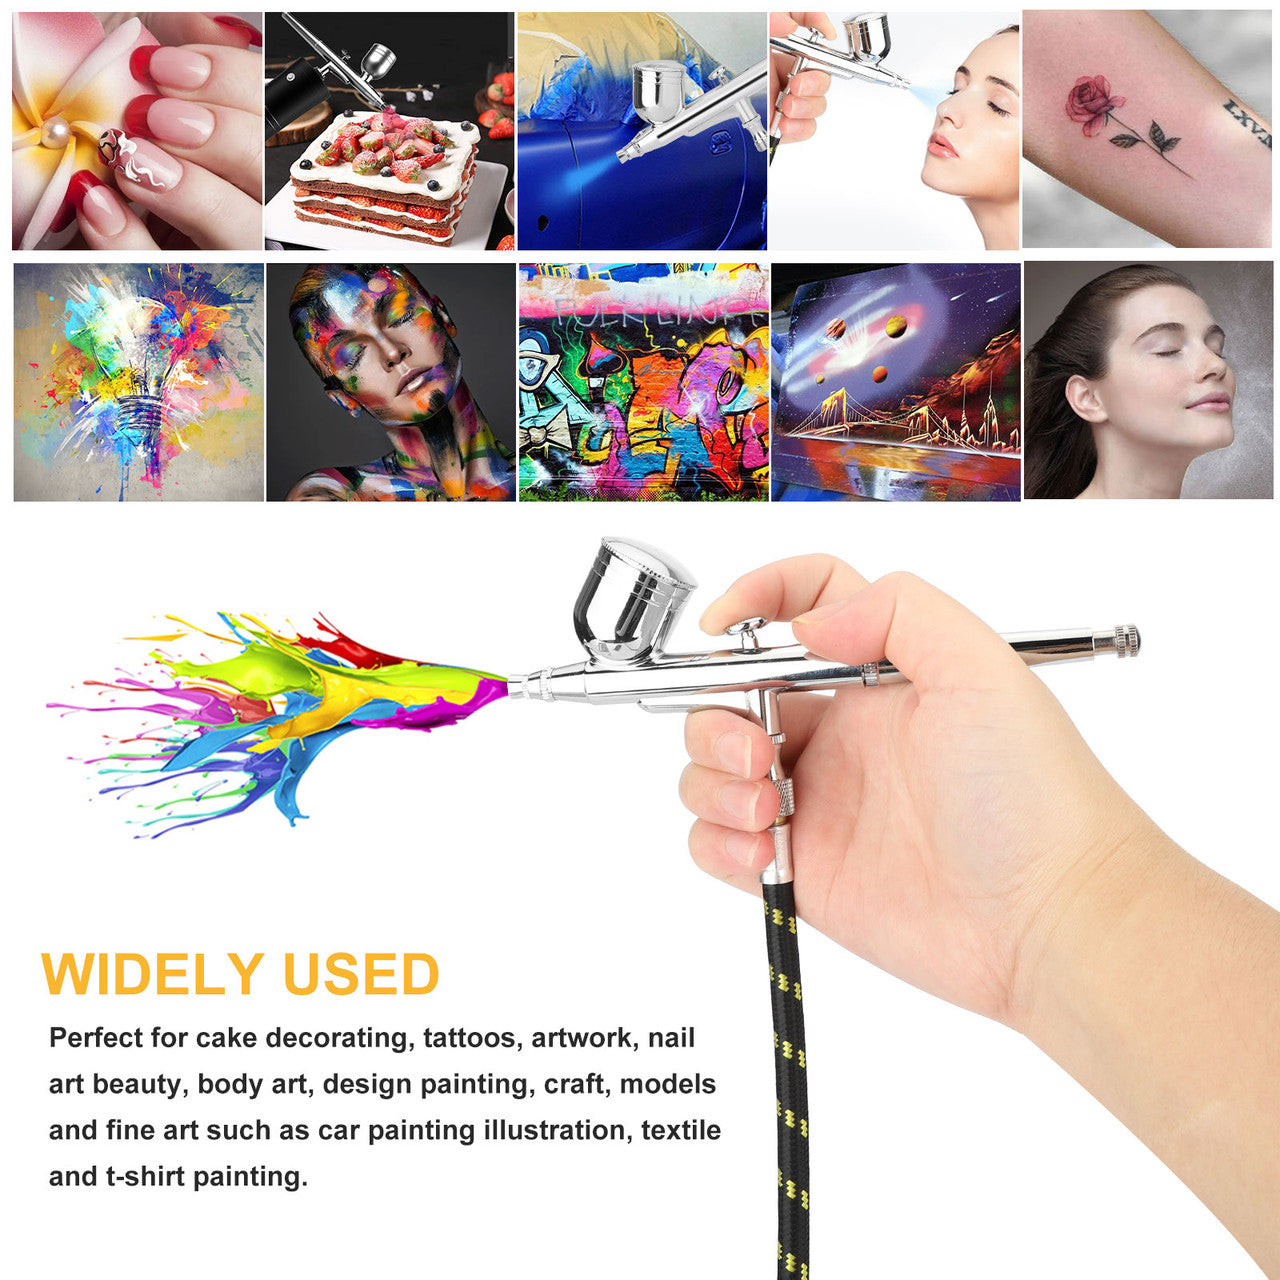 Dual Action Air Brush Airbrush Kit for DIY, Hobby. Fashion and more.